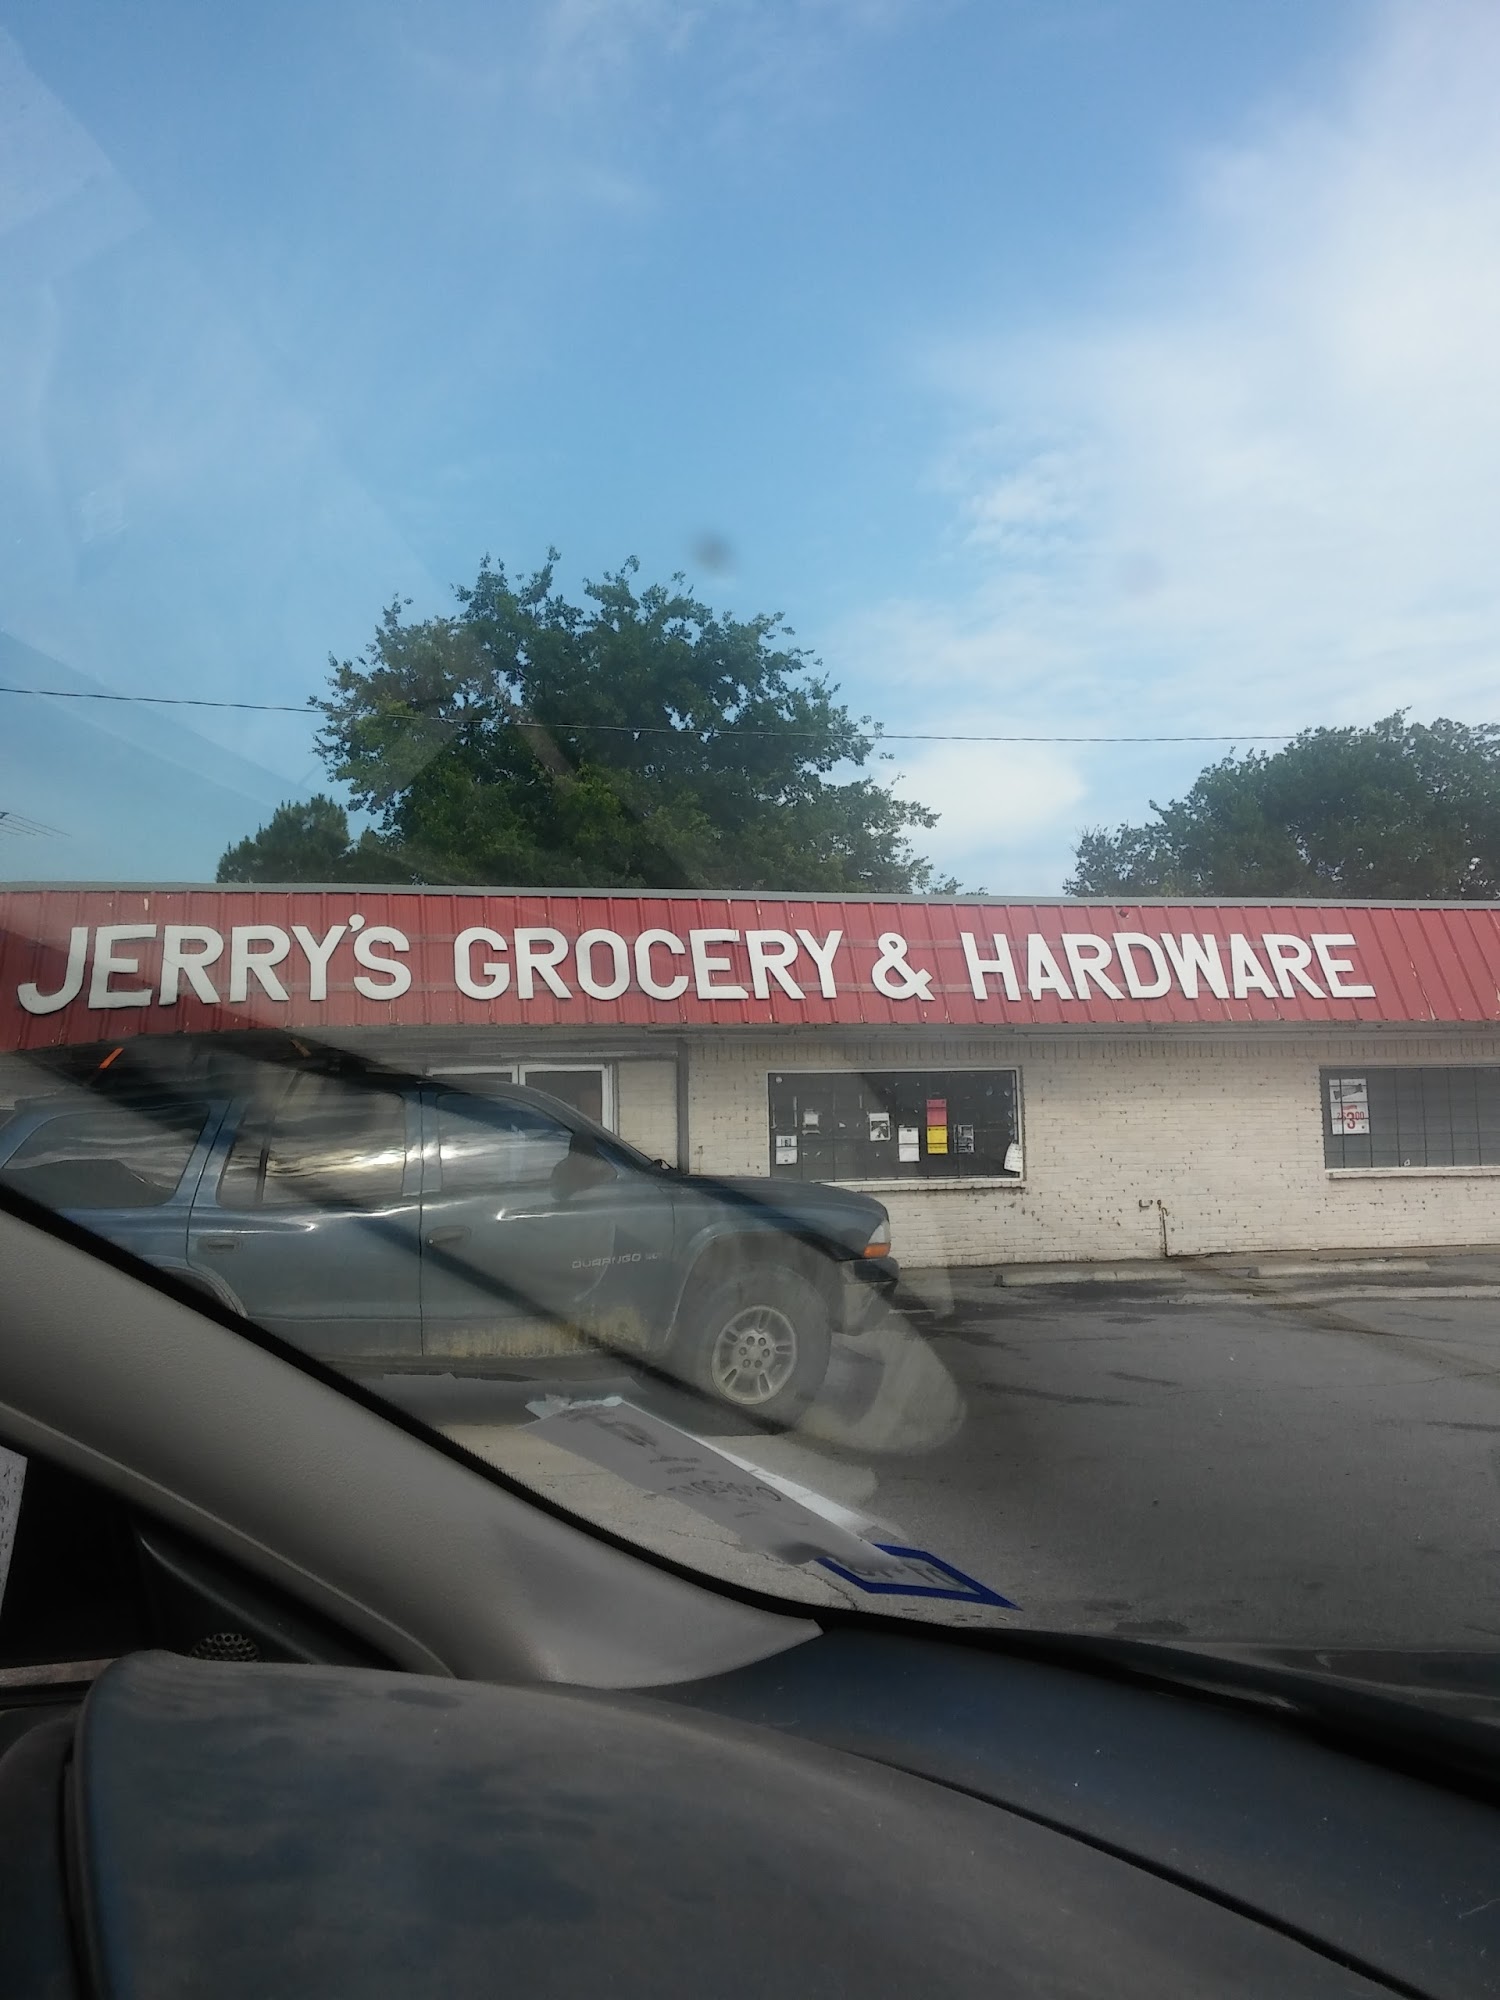 Jerry's Grocery & Hardware